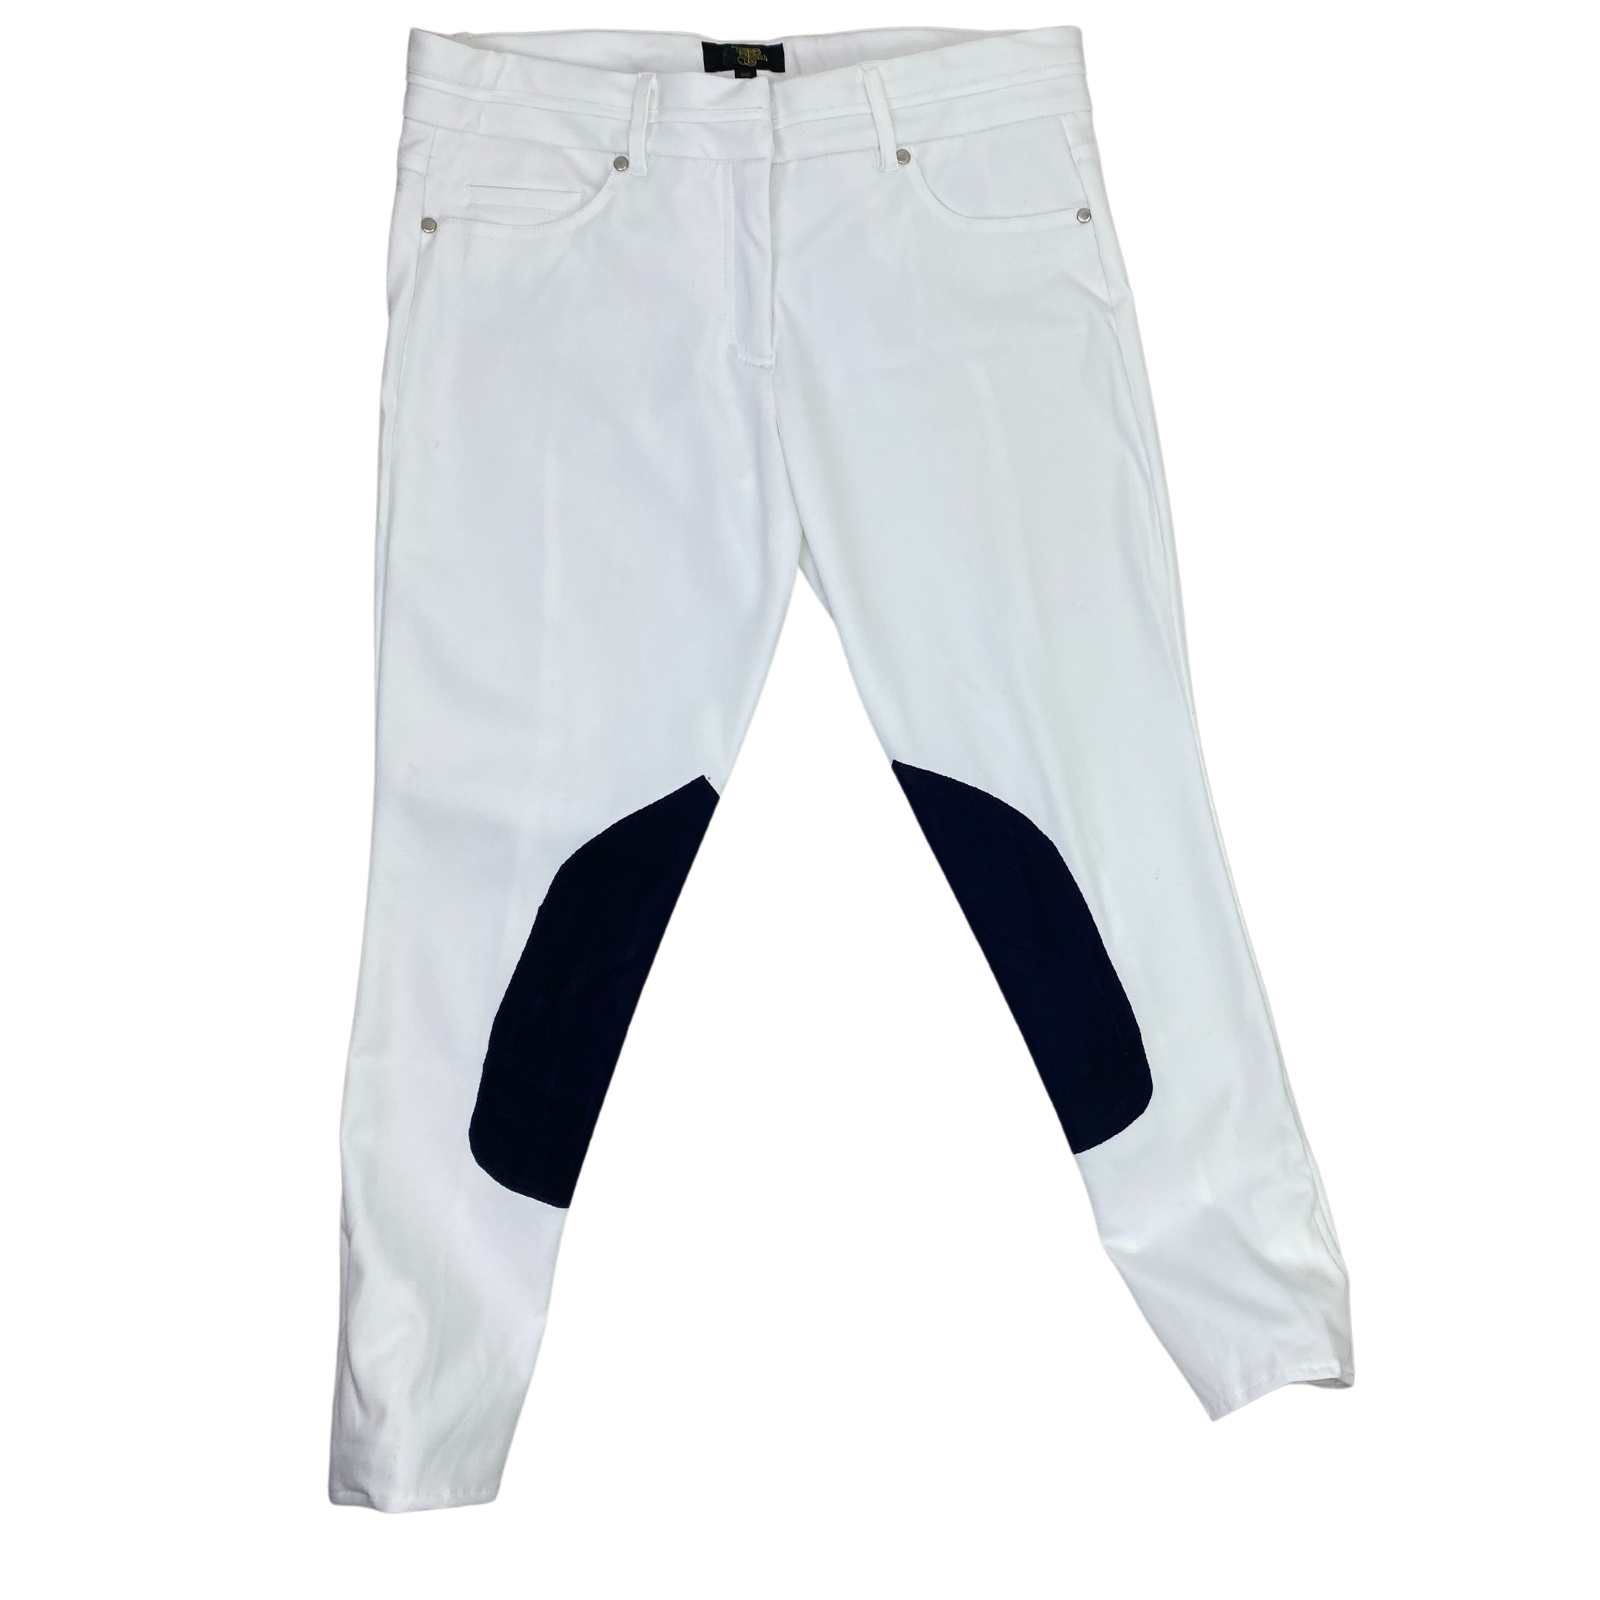 Le Fash 'City' Breeches in White/Navy 